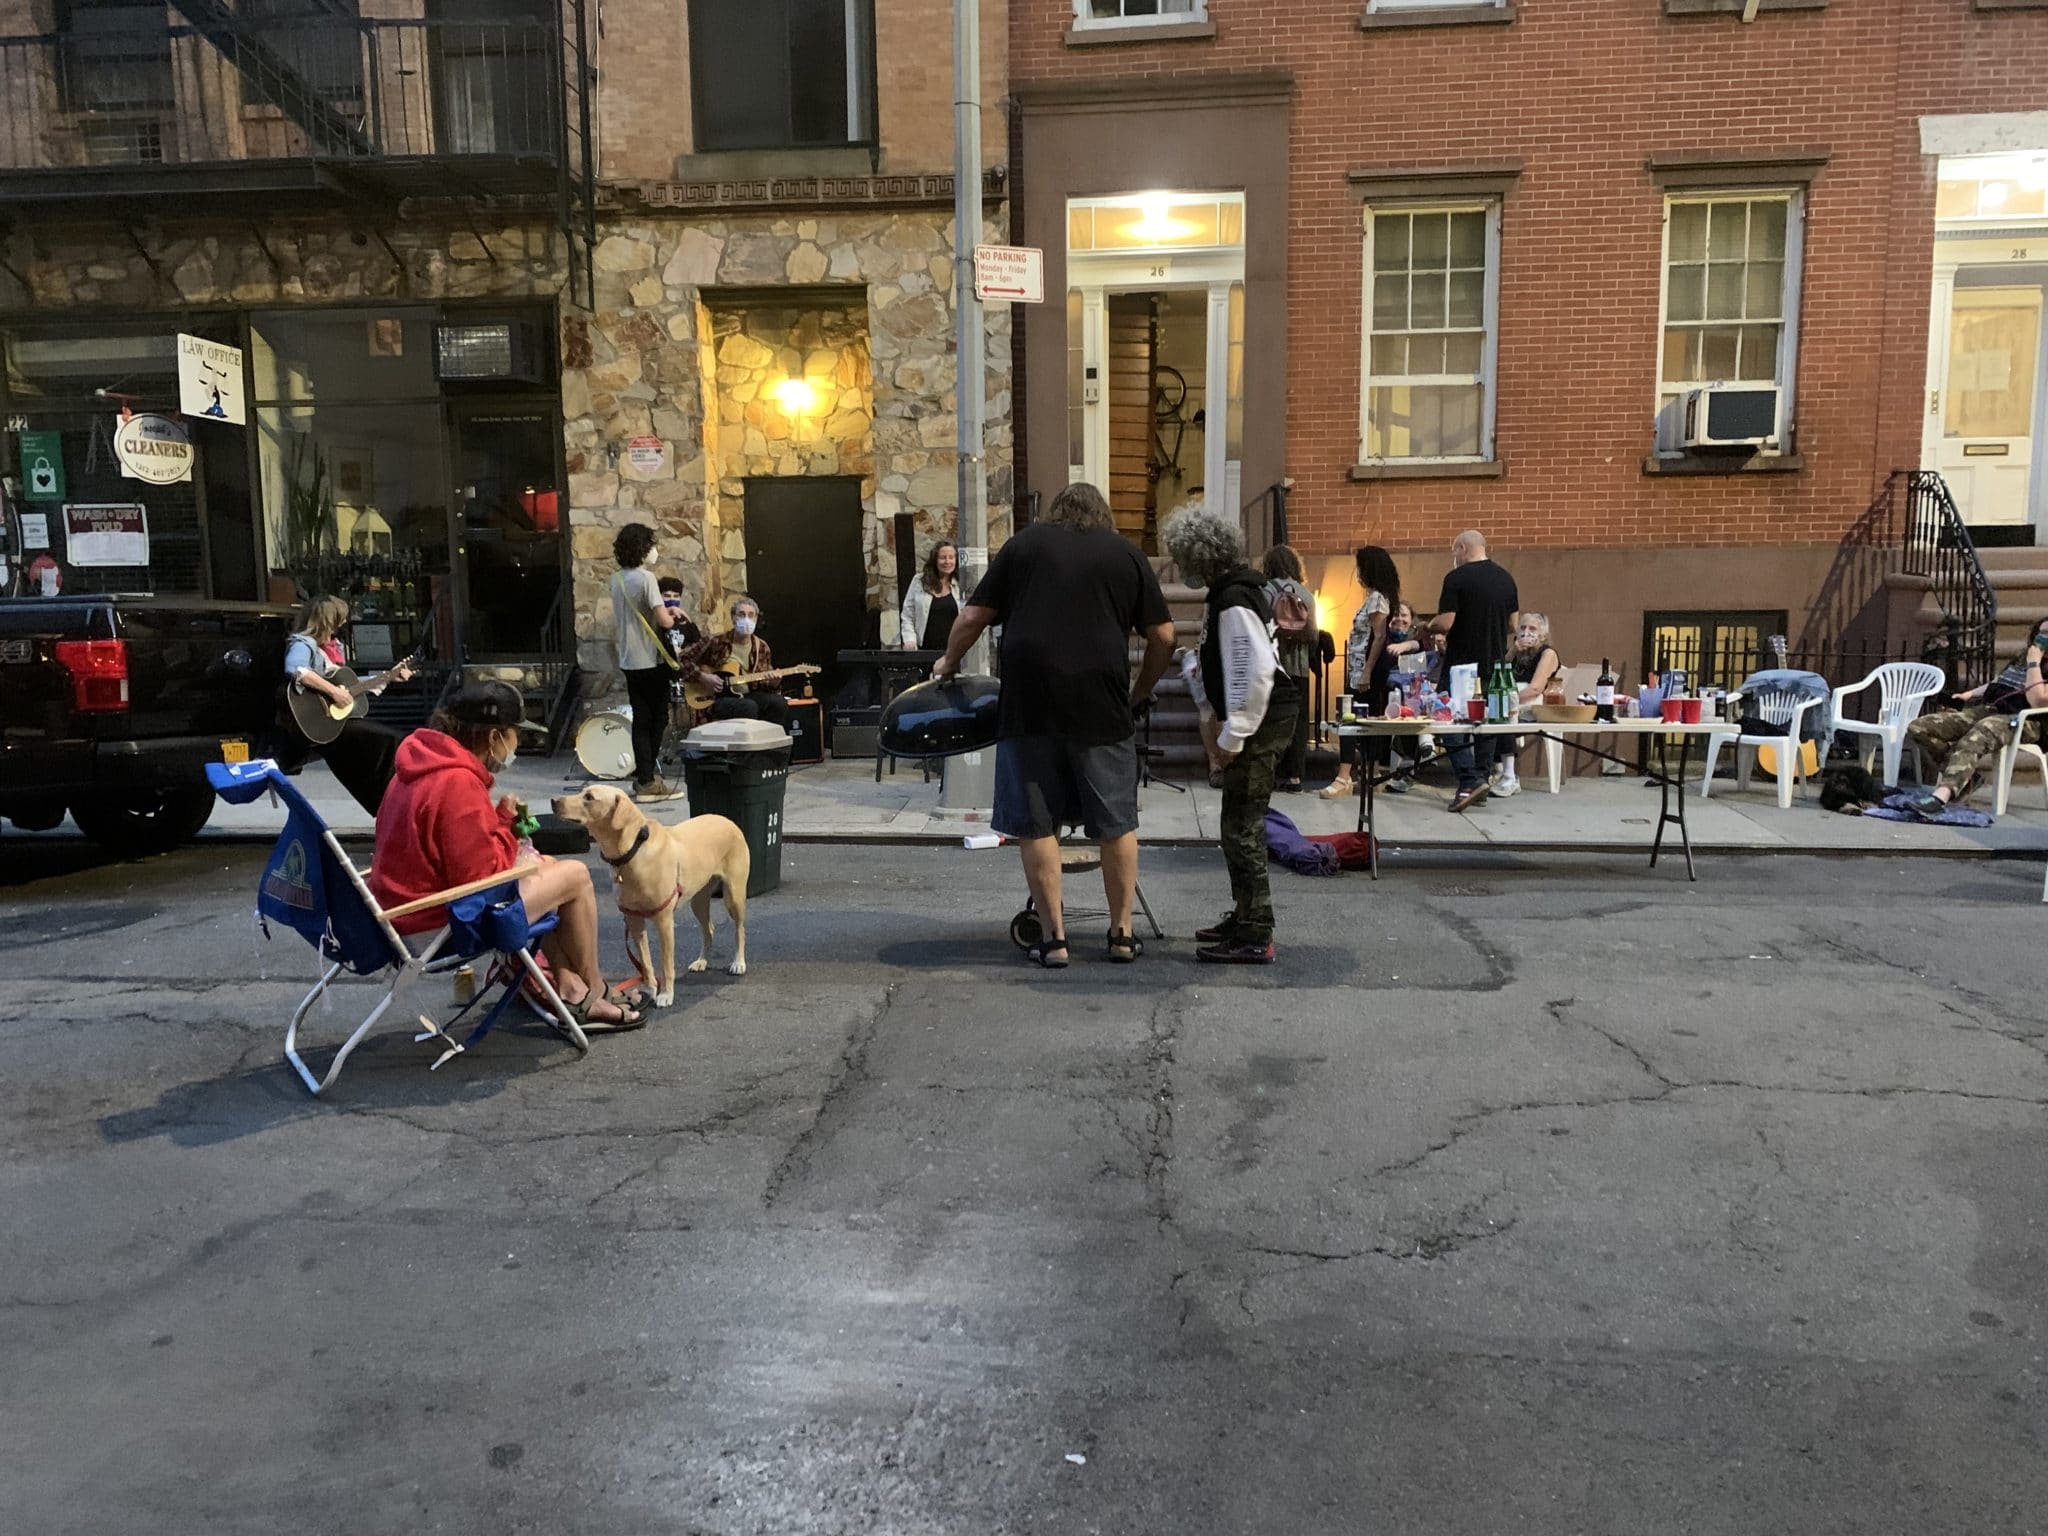 Barbecue at a block party